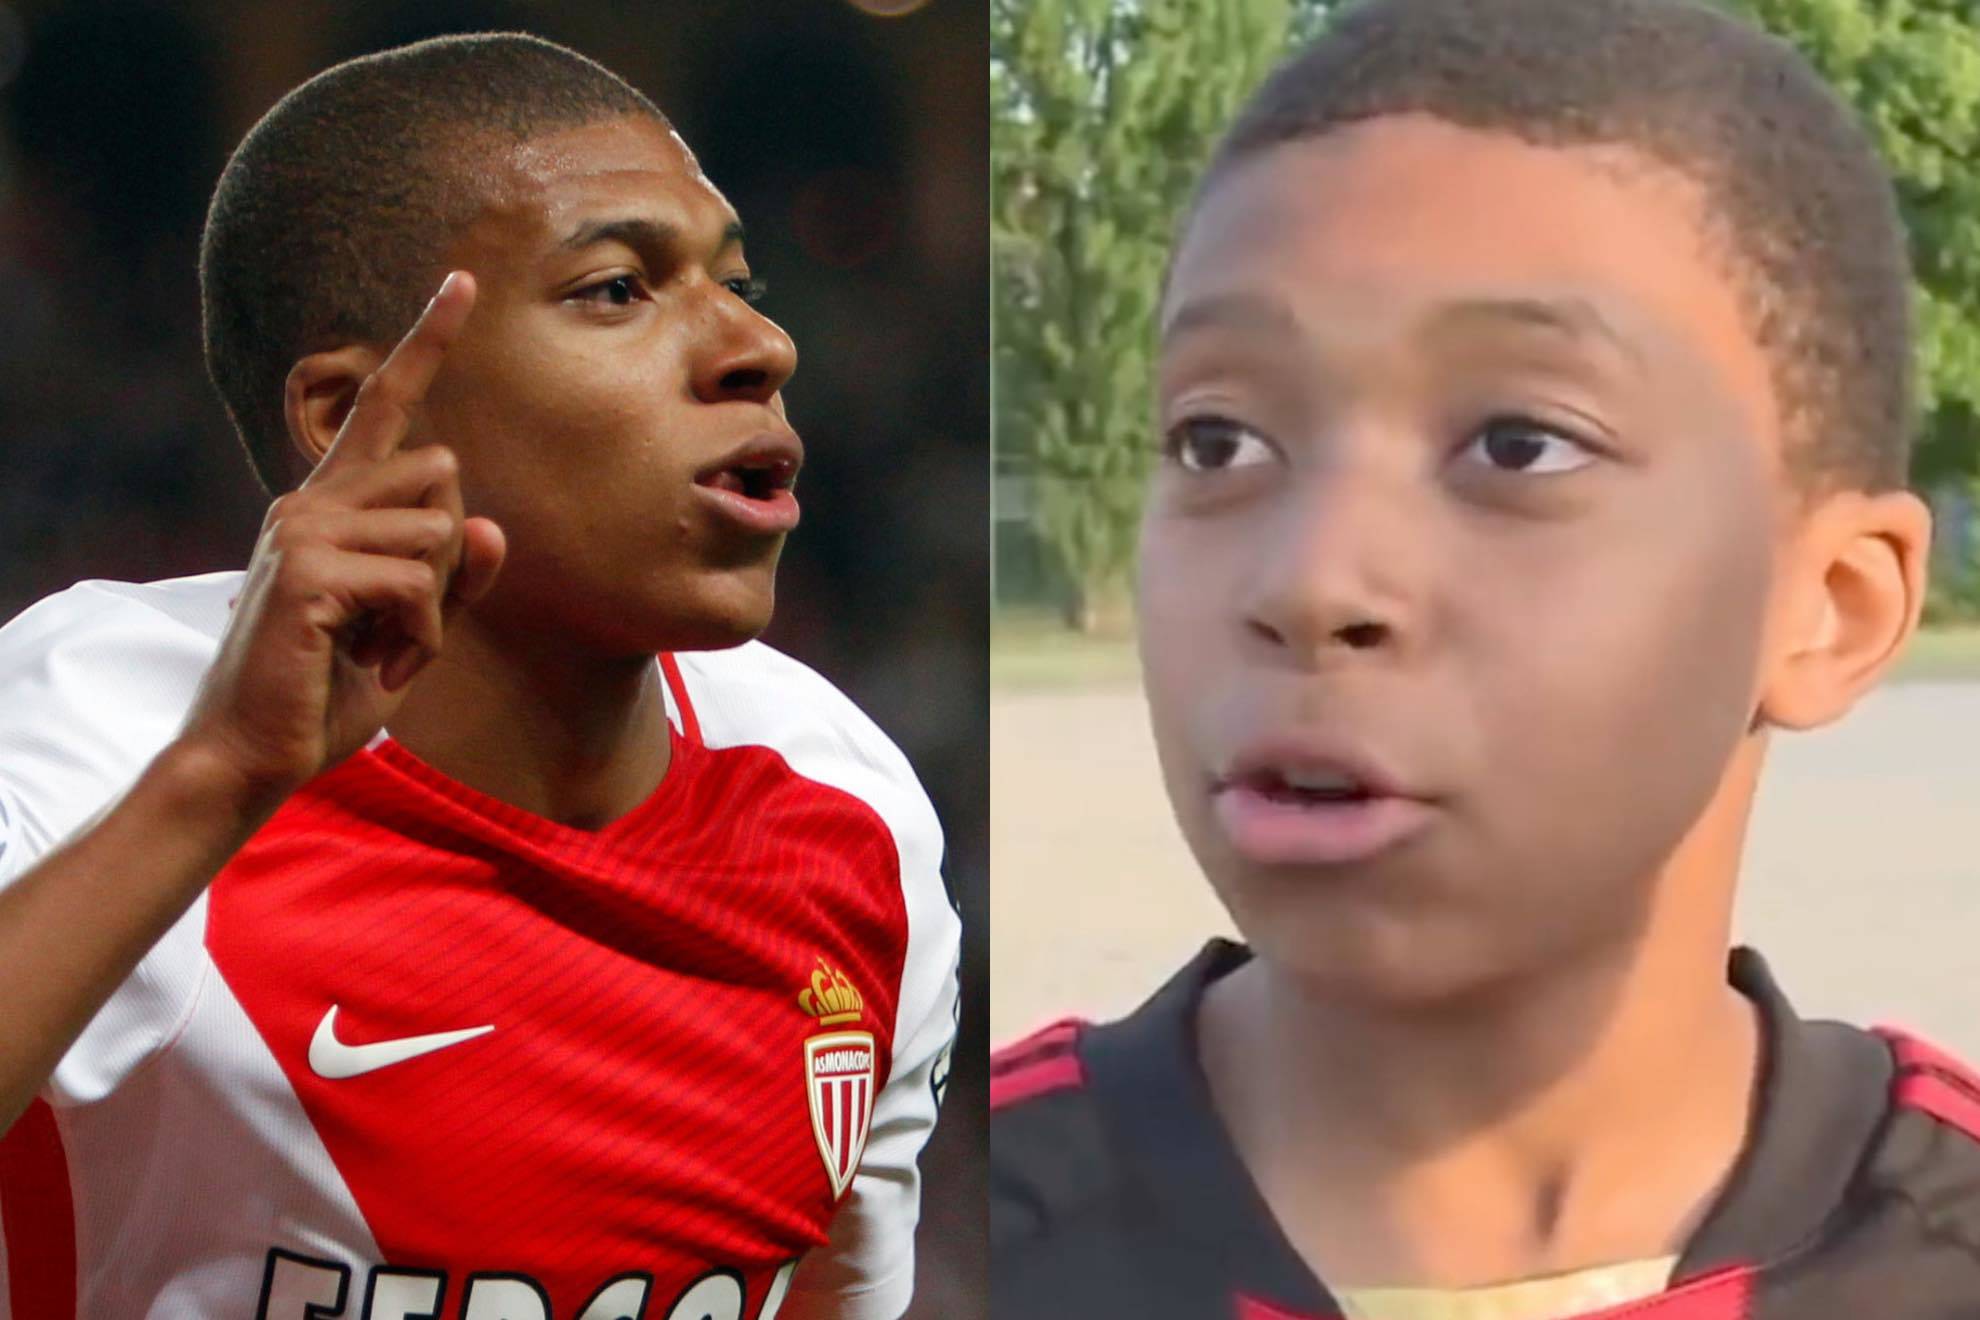 Mbappe's mom reveals his favorite team: "If they lost, he would throw the remote control at the TV"